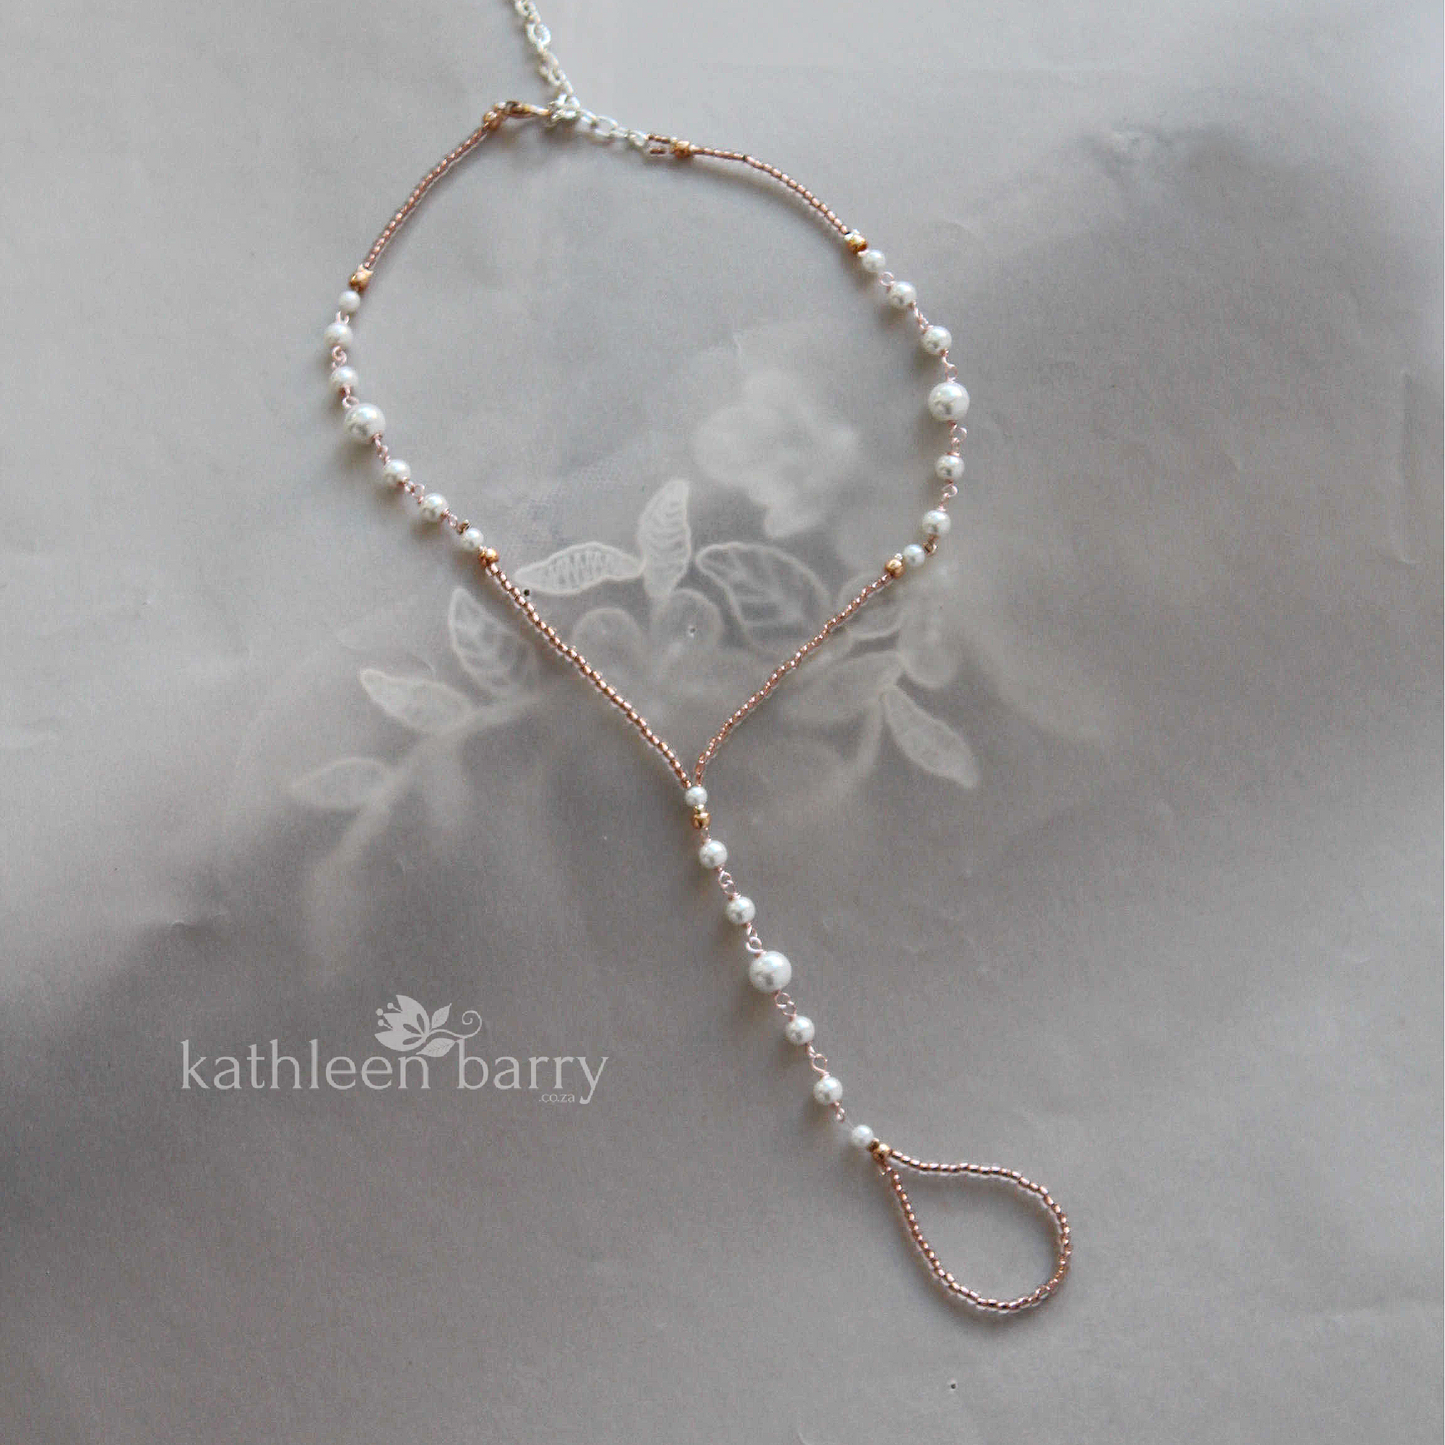 Cherize Barefoot Jewellery Sandals for Brides and bridal party - (Pair) Available in Rose gold, gold or silver